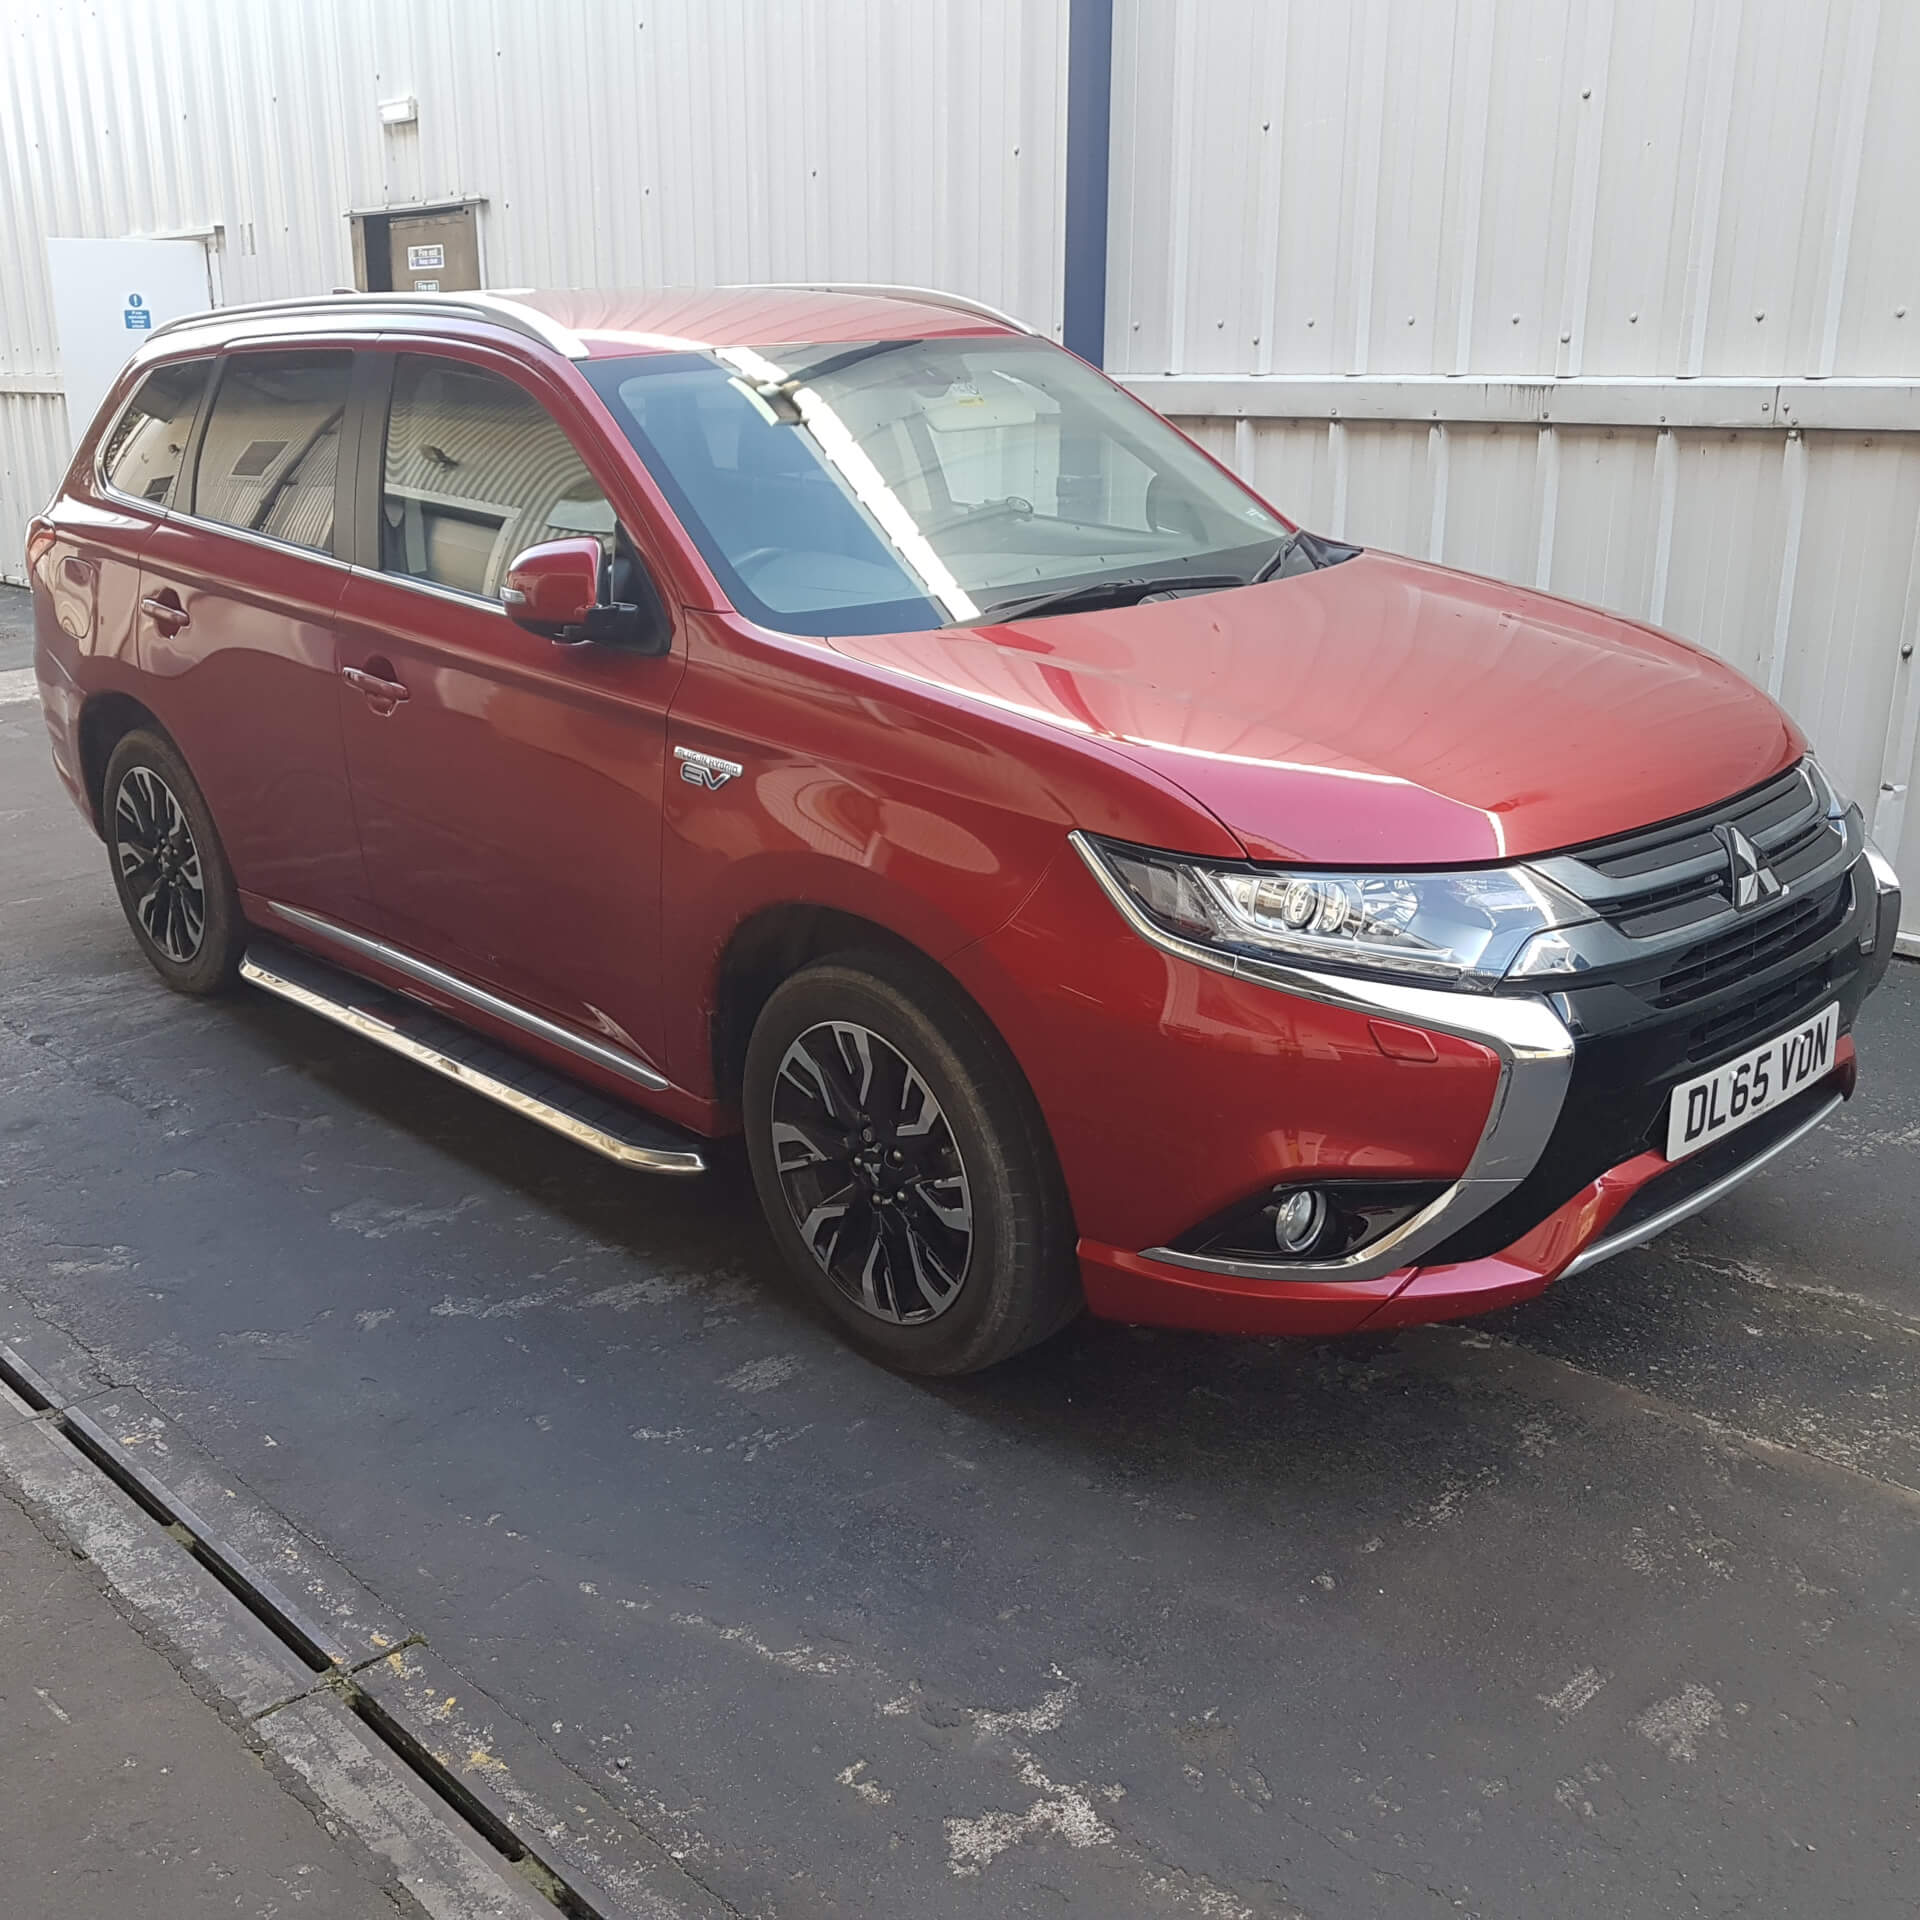 Direct4x4 accessories for Mitsubishi Outlander vehicles with a photo of a red Mitsubishi Outlander outside our offices fitted with High Flyer style side steps